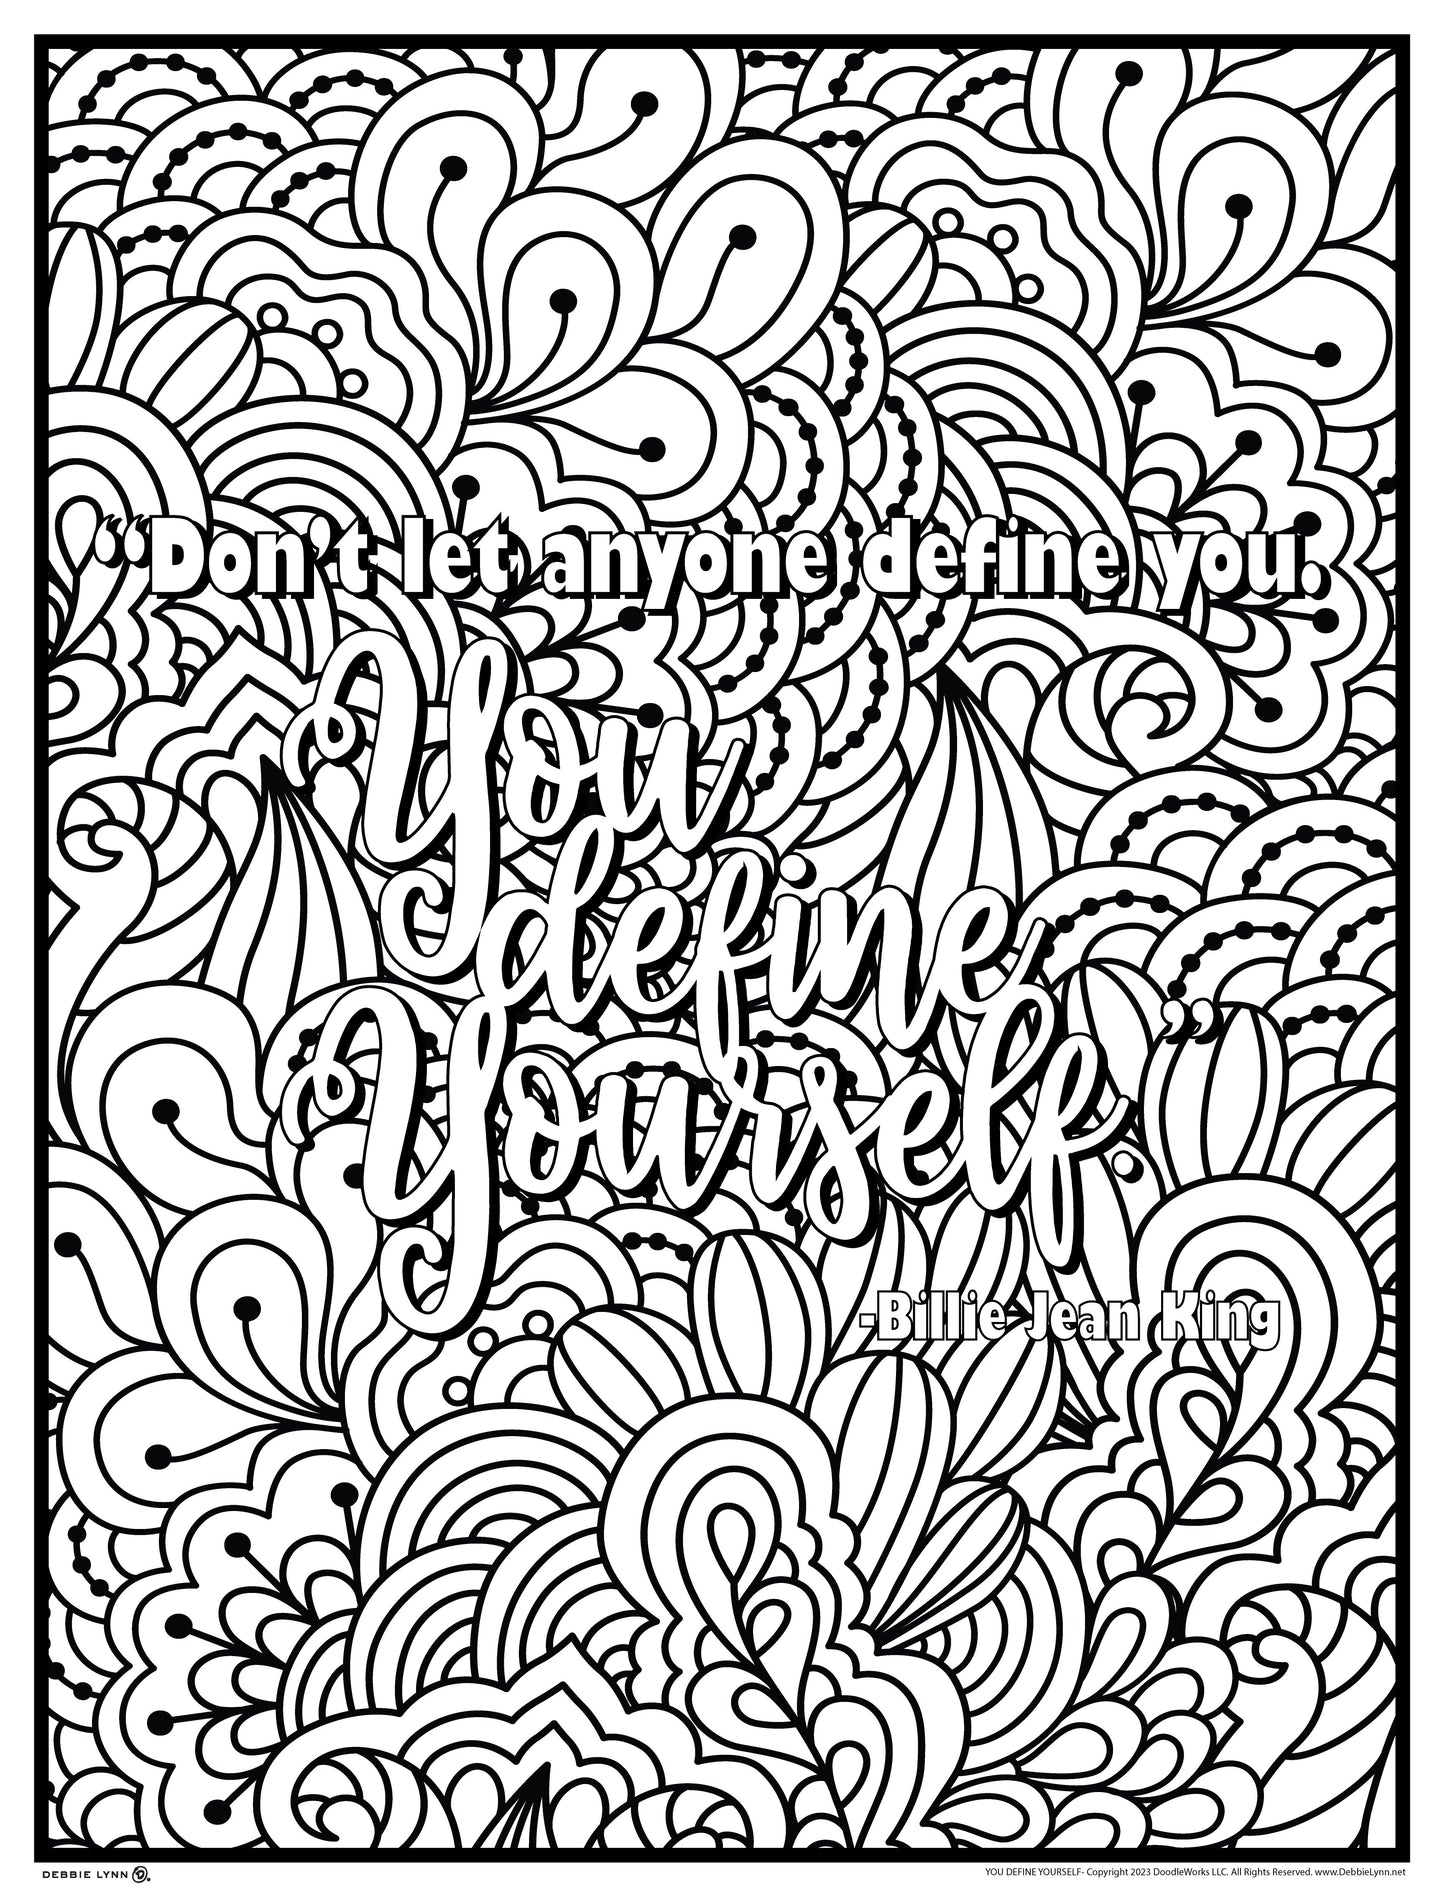 You Define Yourself Personalized Giant Coloring Poster 46" x 60"